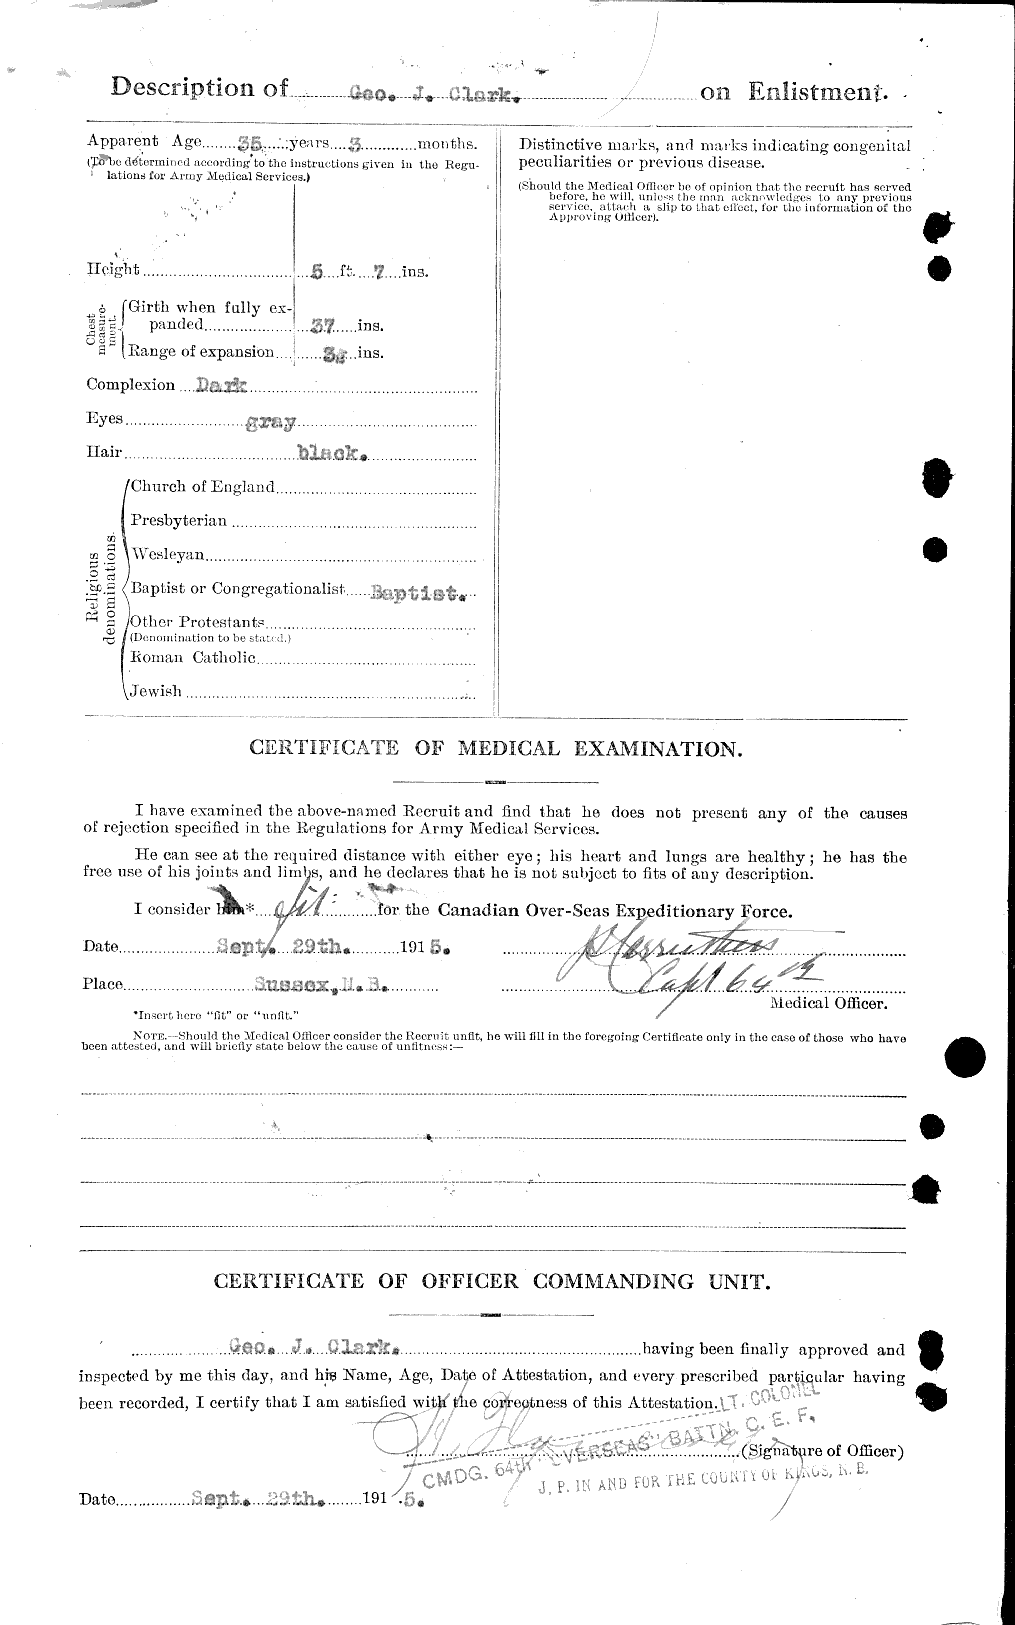 Personnel Records of the First World War - CEF 021083b